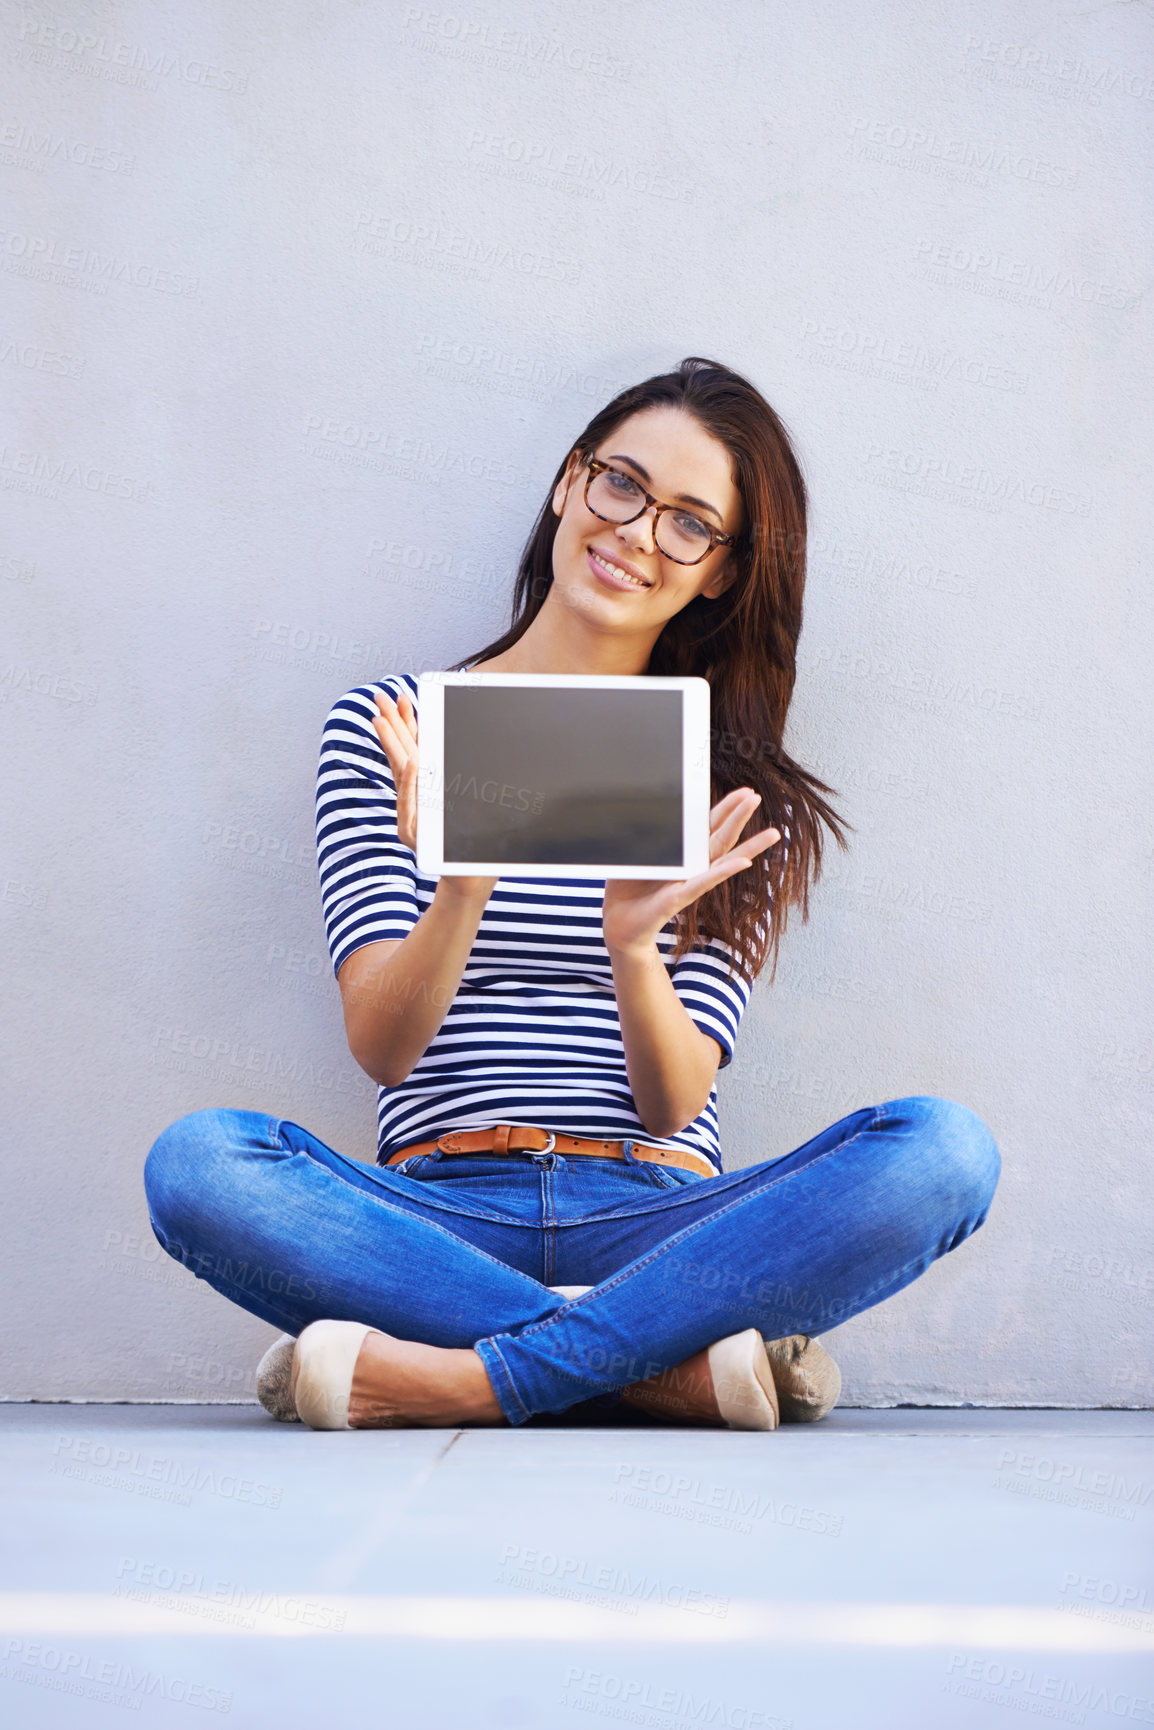 Buy stock photo Full-length shot of an attractive young woman holding up a digital tablet with a blank screen